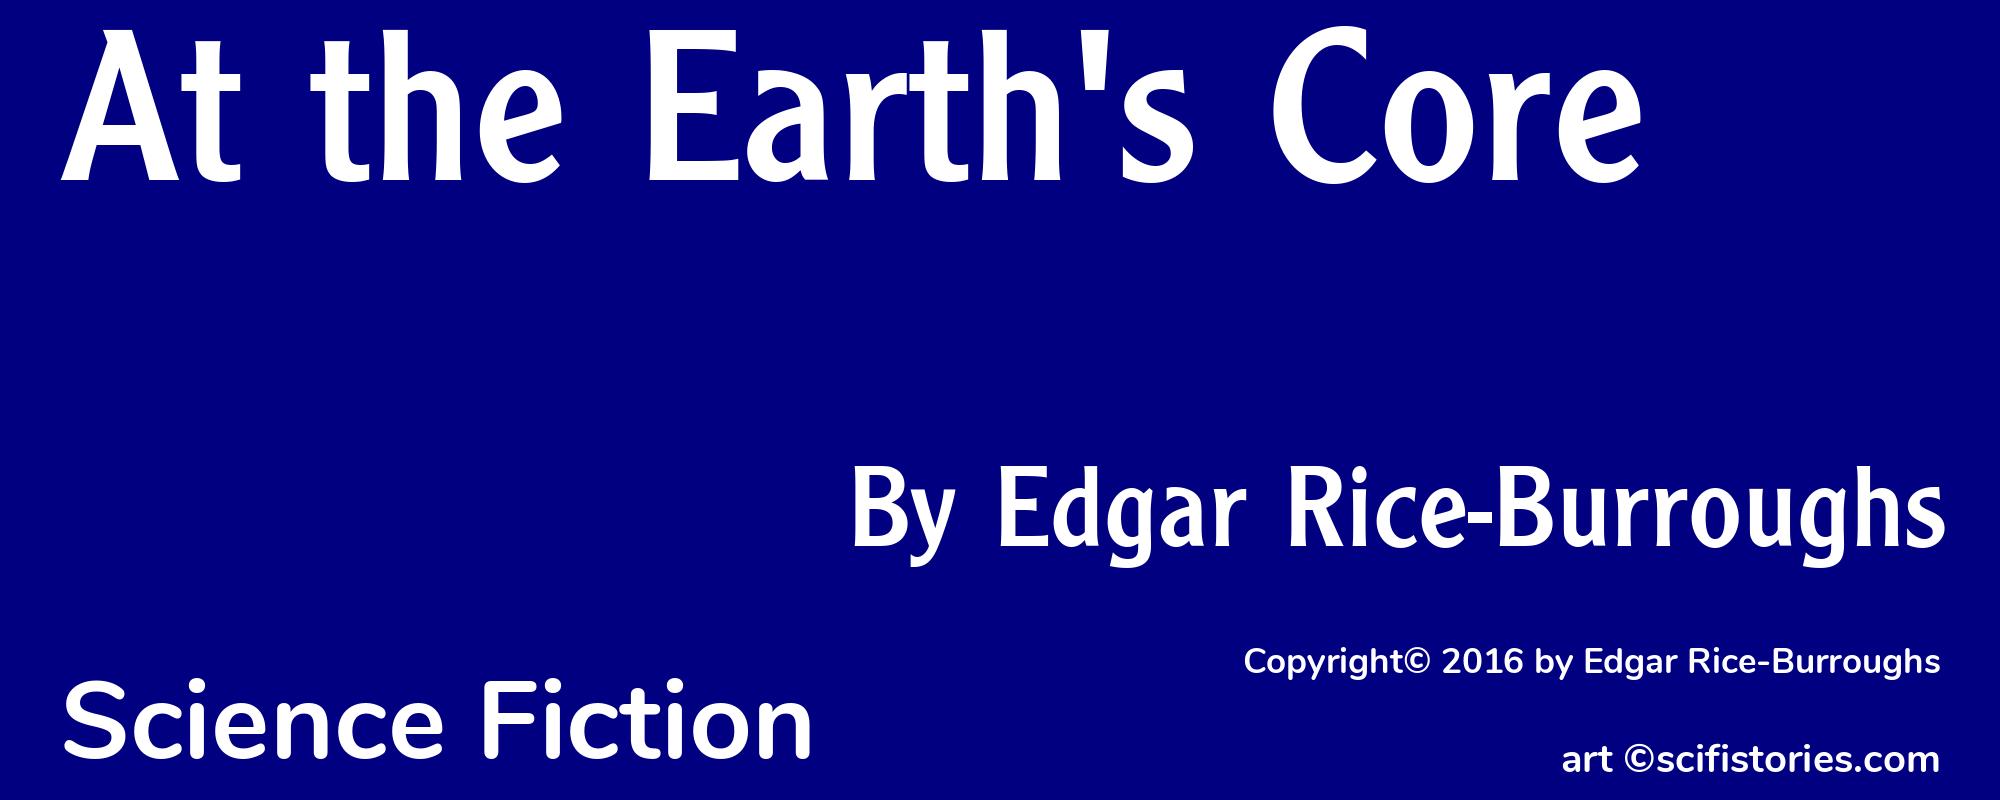 At the Earth's Core - Cover